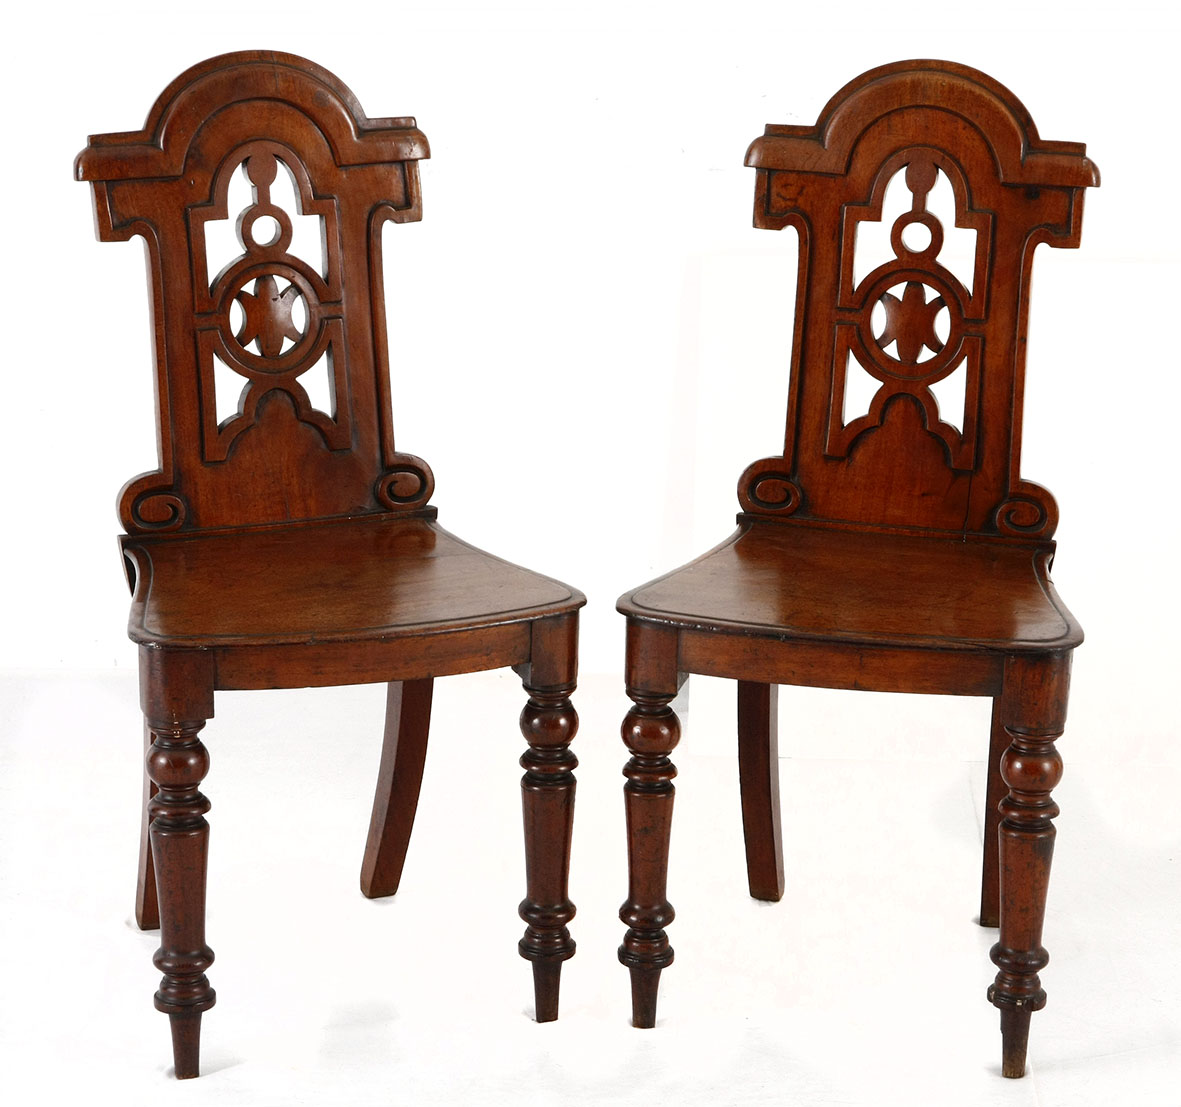 A PAIR OF WILLIAM IV MAHOGANY CHAIRS each with a moulded arched top rail above a pierced splat,